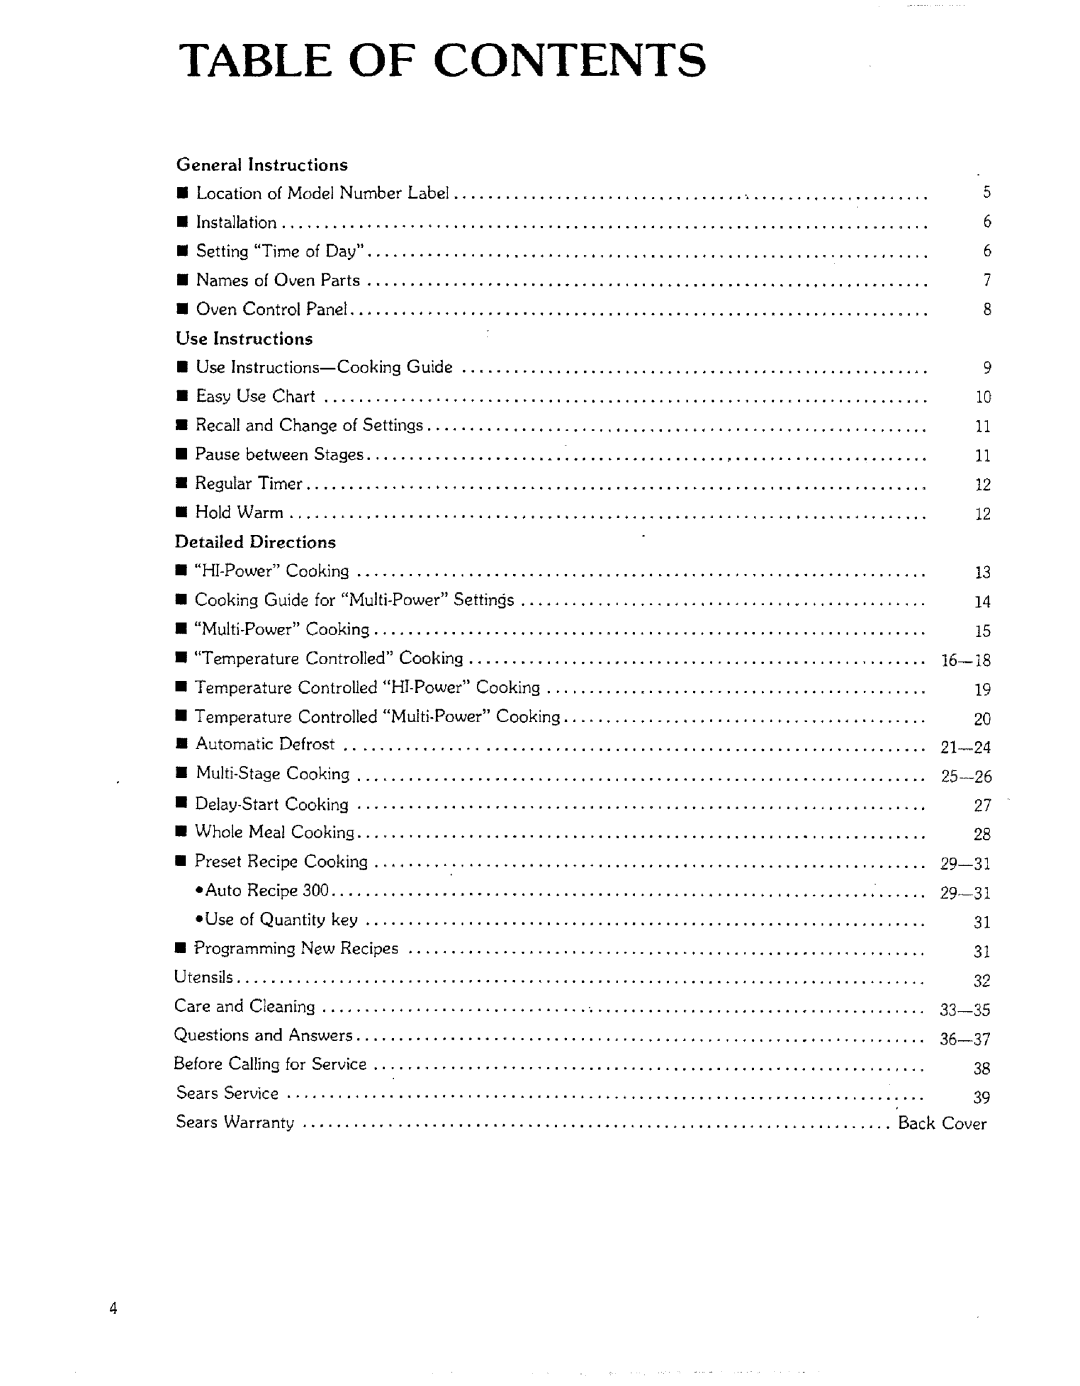 Sears 85951 manual Table Of Contents, Instructions 